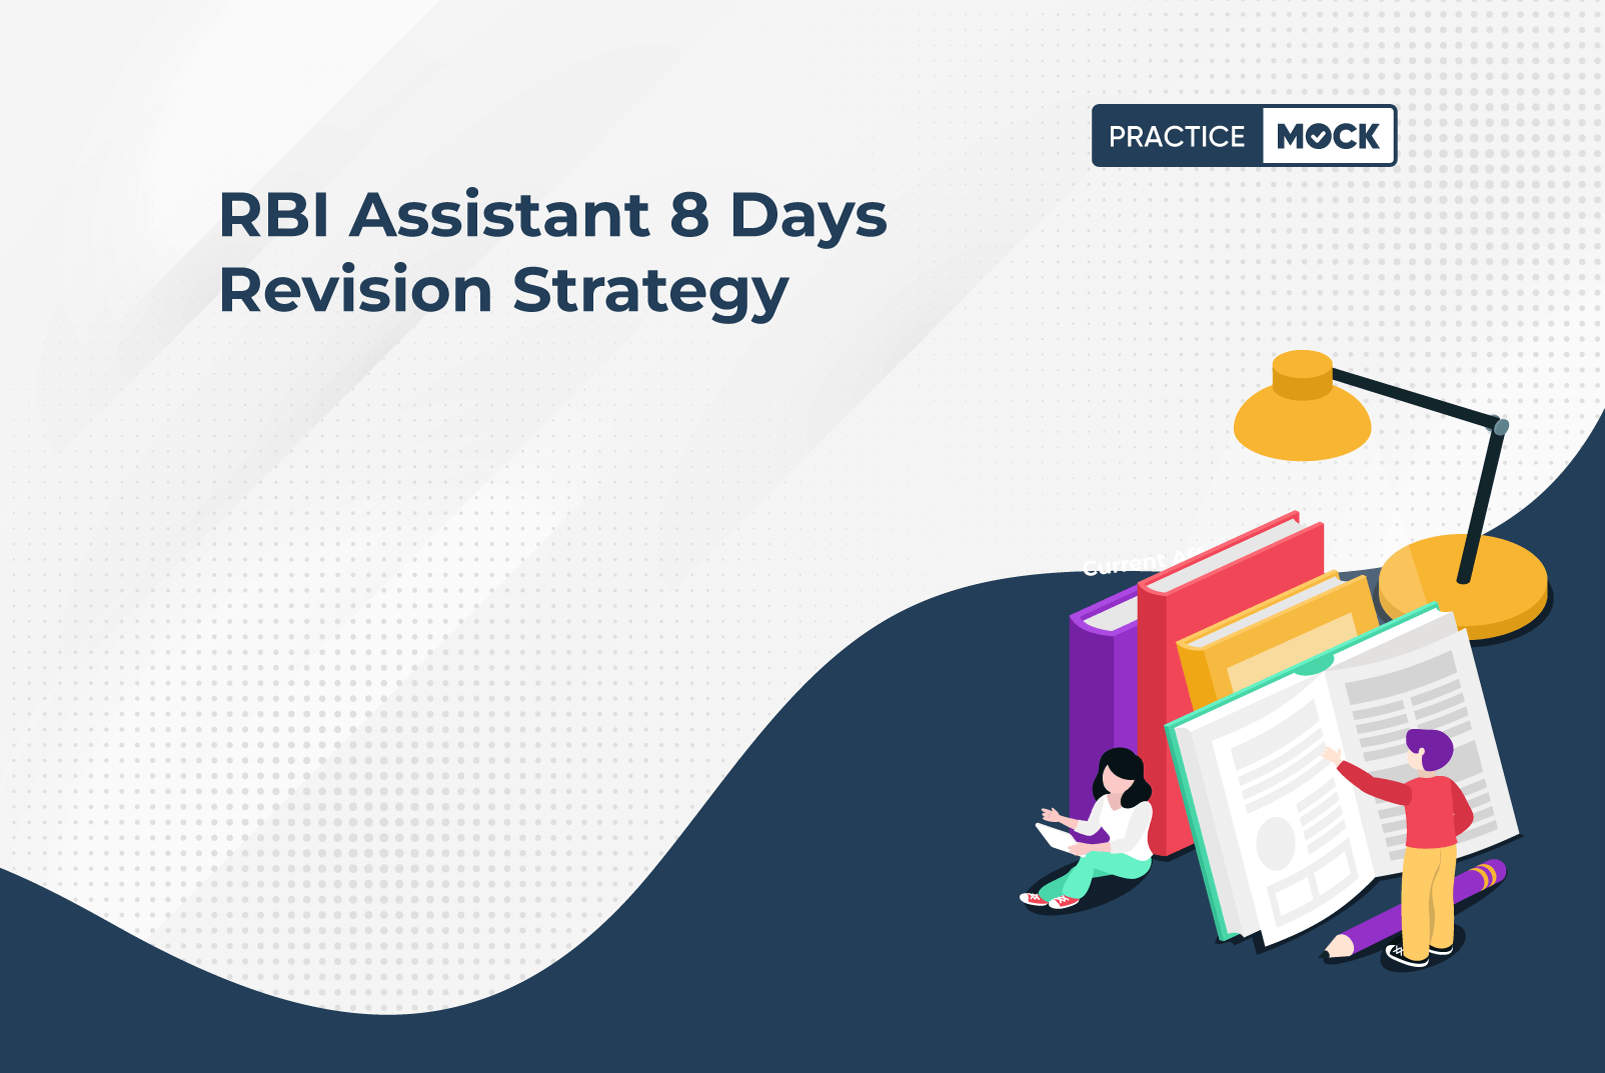 RBI Assistant 8 Days Revision Strategy